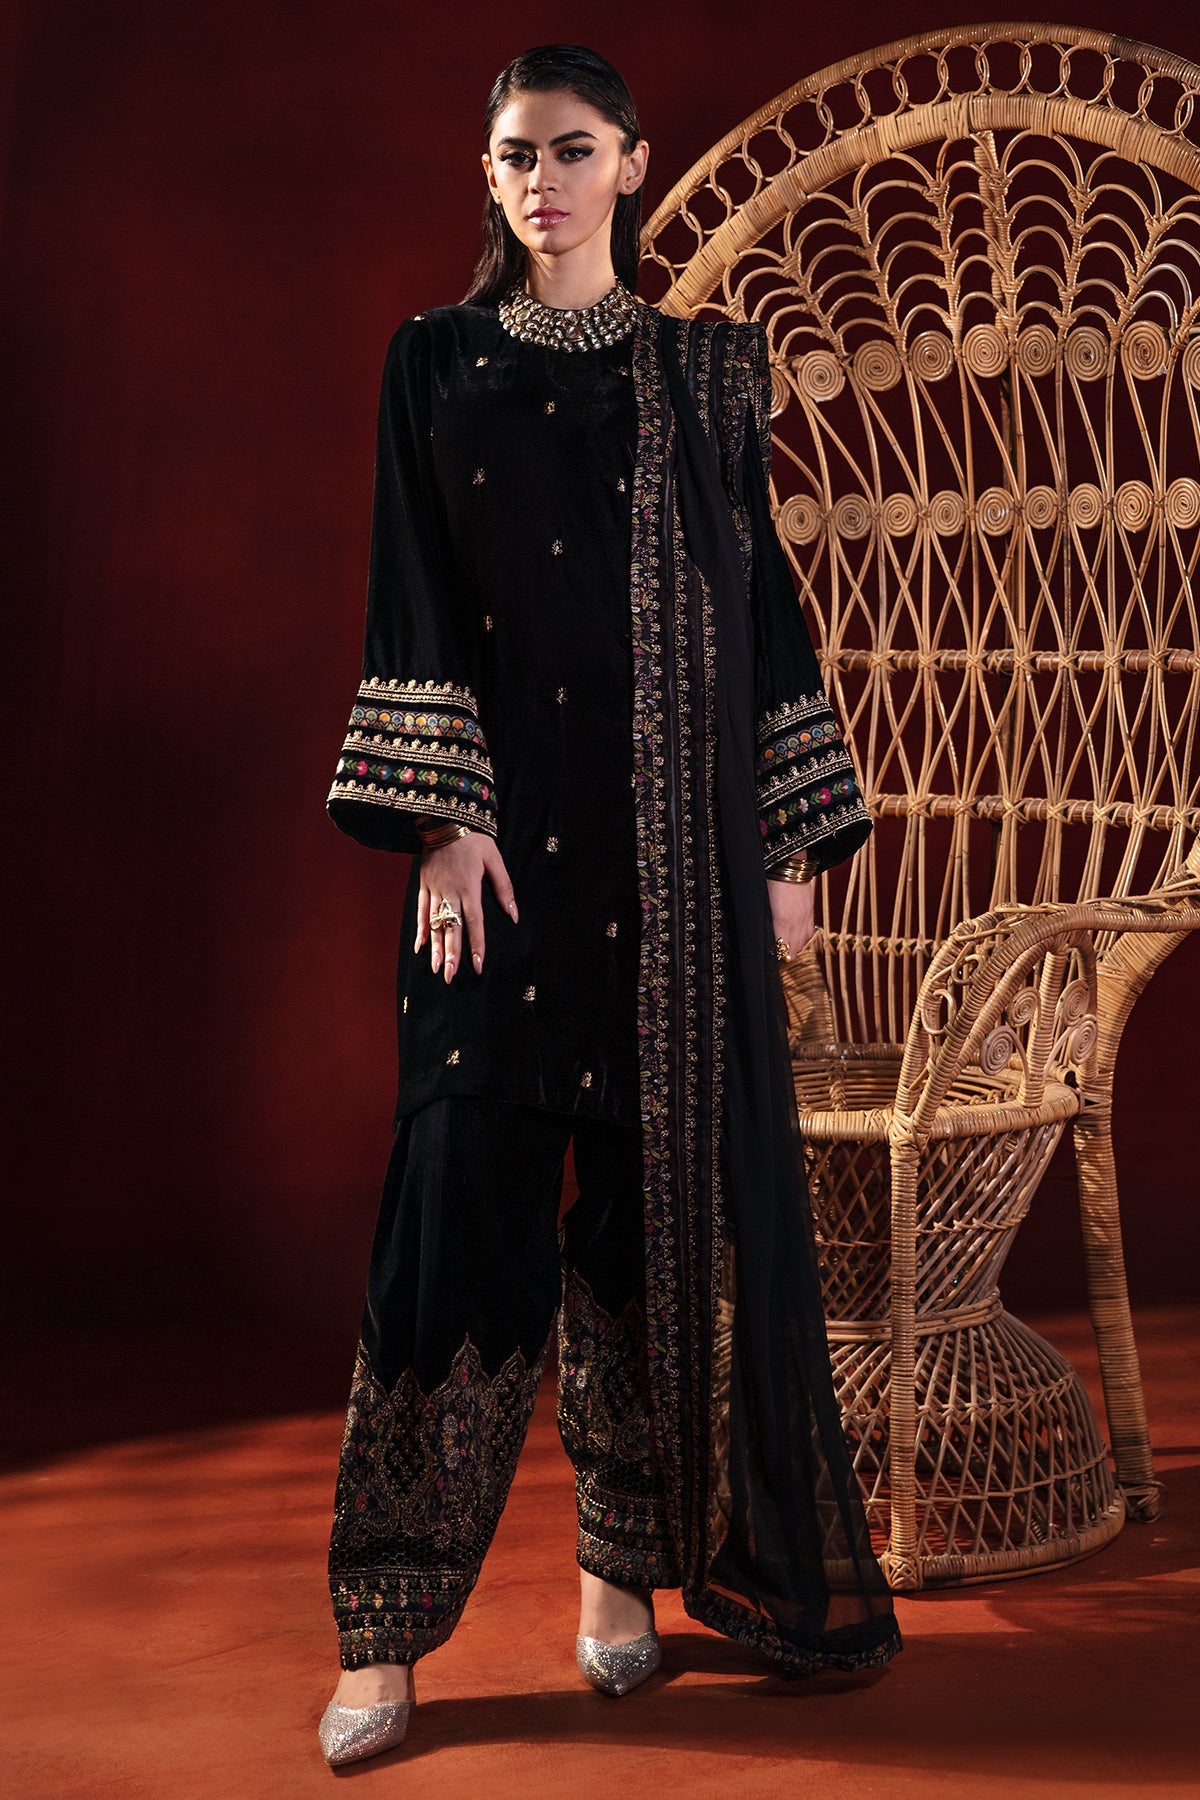 3-PC Embroidered Velvet Shirt with Embroidered Chiffon Dupatta and Trouser VVT-3-208